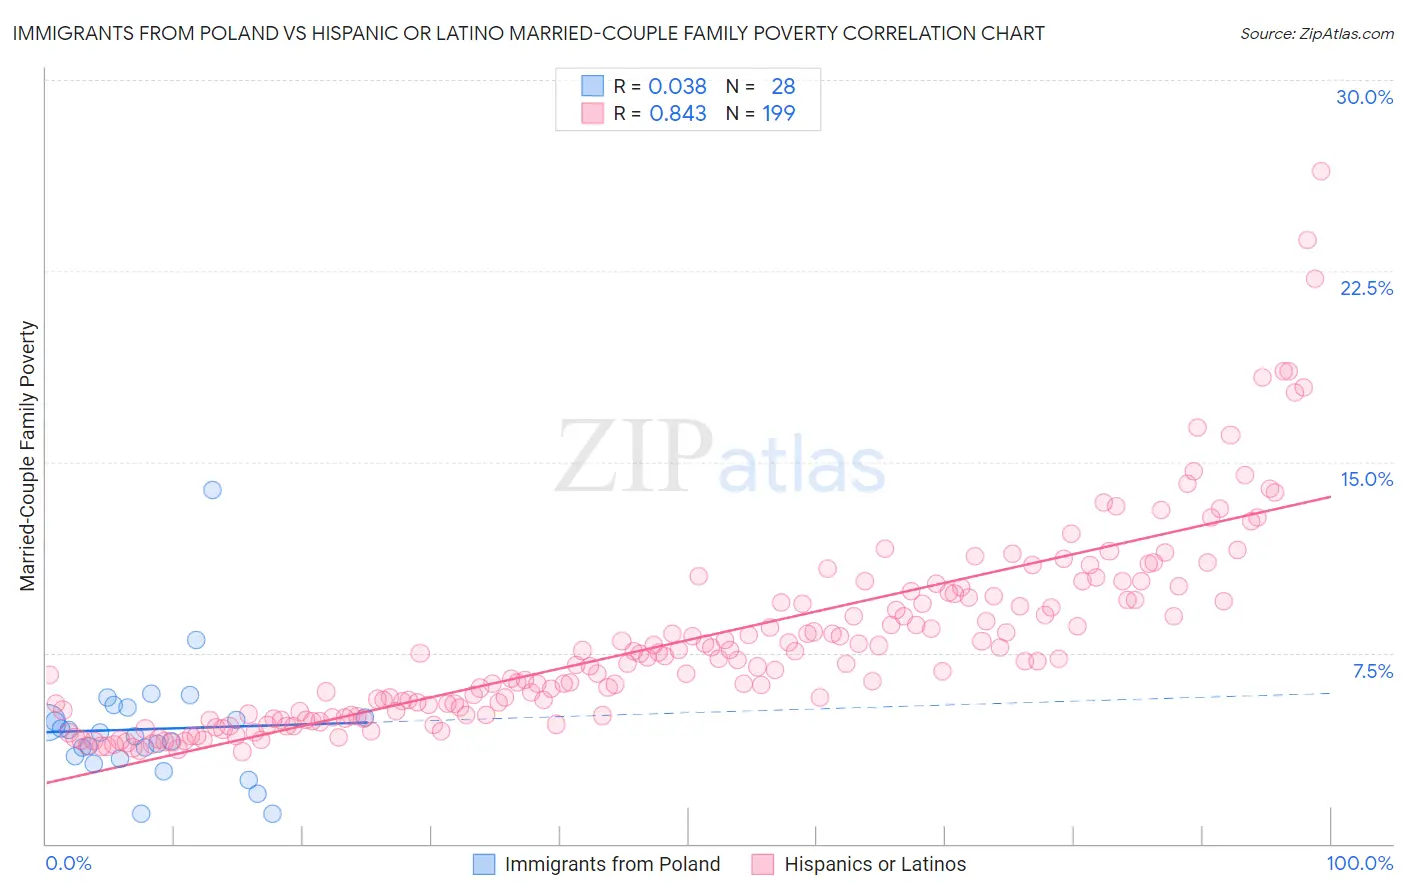 Immigrants from Poland vs Hispanic or Latino Married-Couple Family Poverty